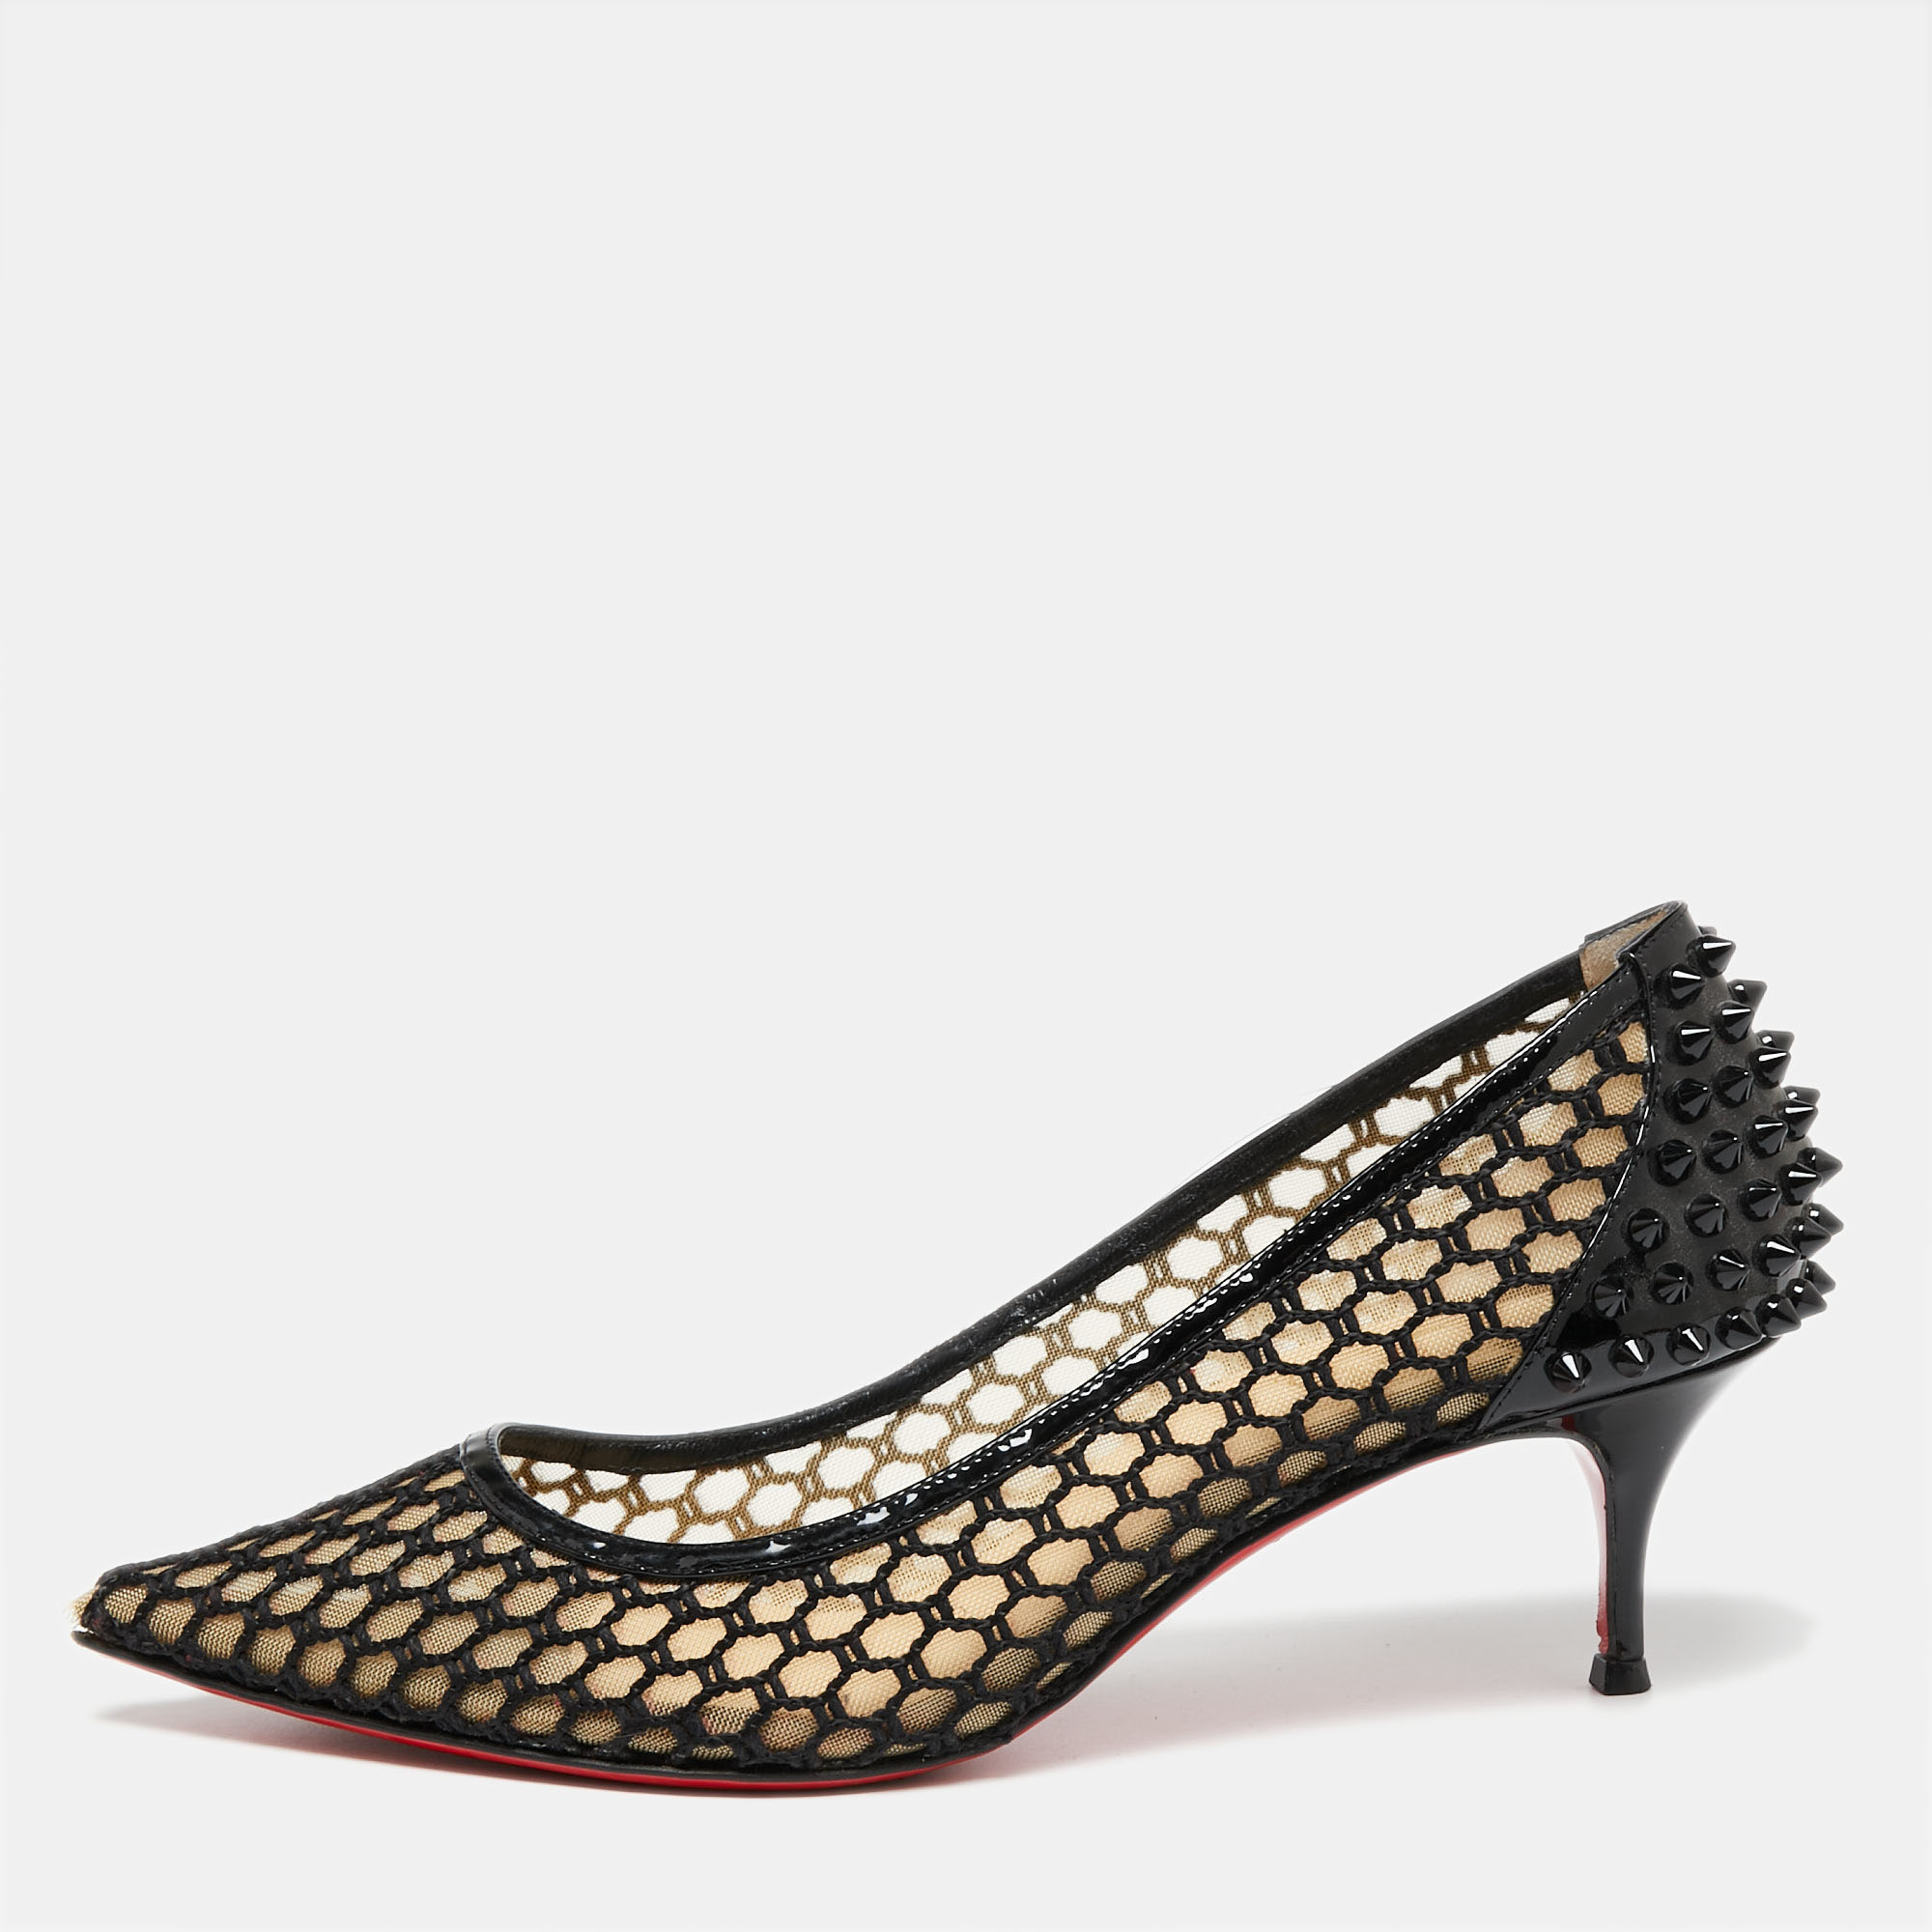 Christian Louboutin brings an element of class to your closet with these stunning Guni pumps. They are created using black mesh and patent leather on the exterior. They showcase pointed toes slim heels and a slip on closure. Make a fashion statement by wearing these gorgeous CL pumps.